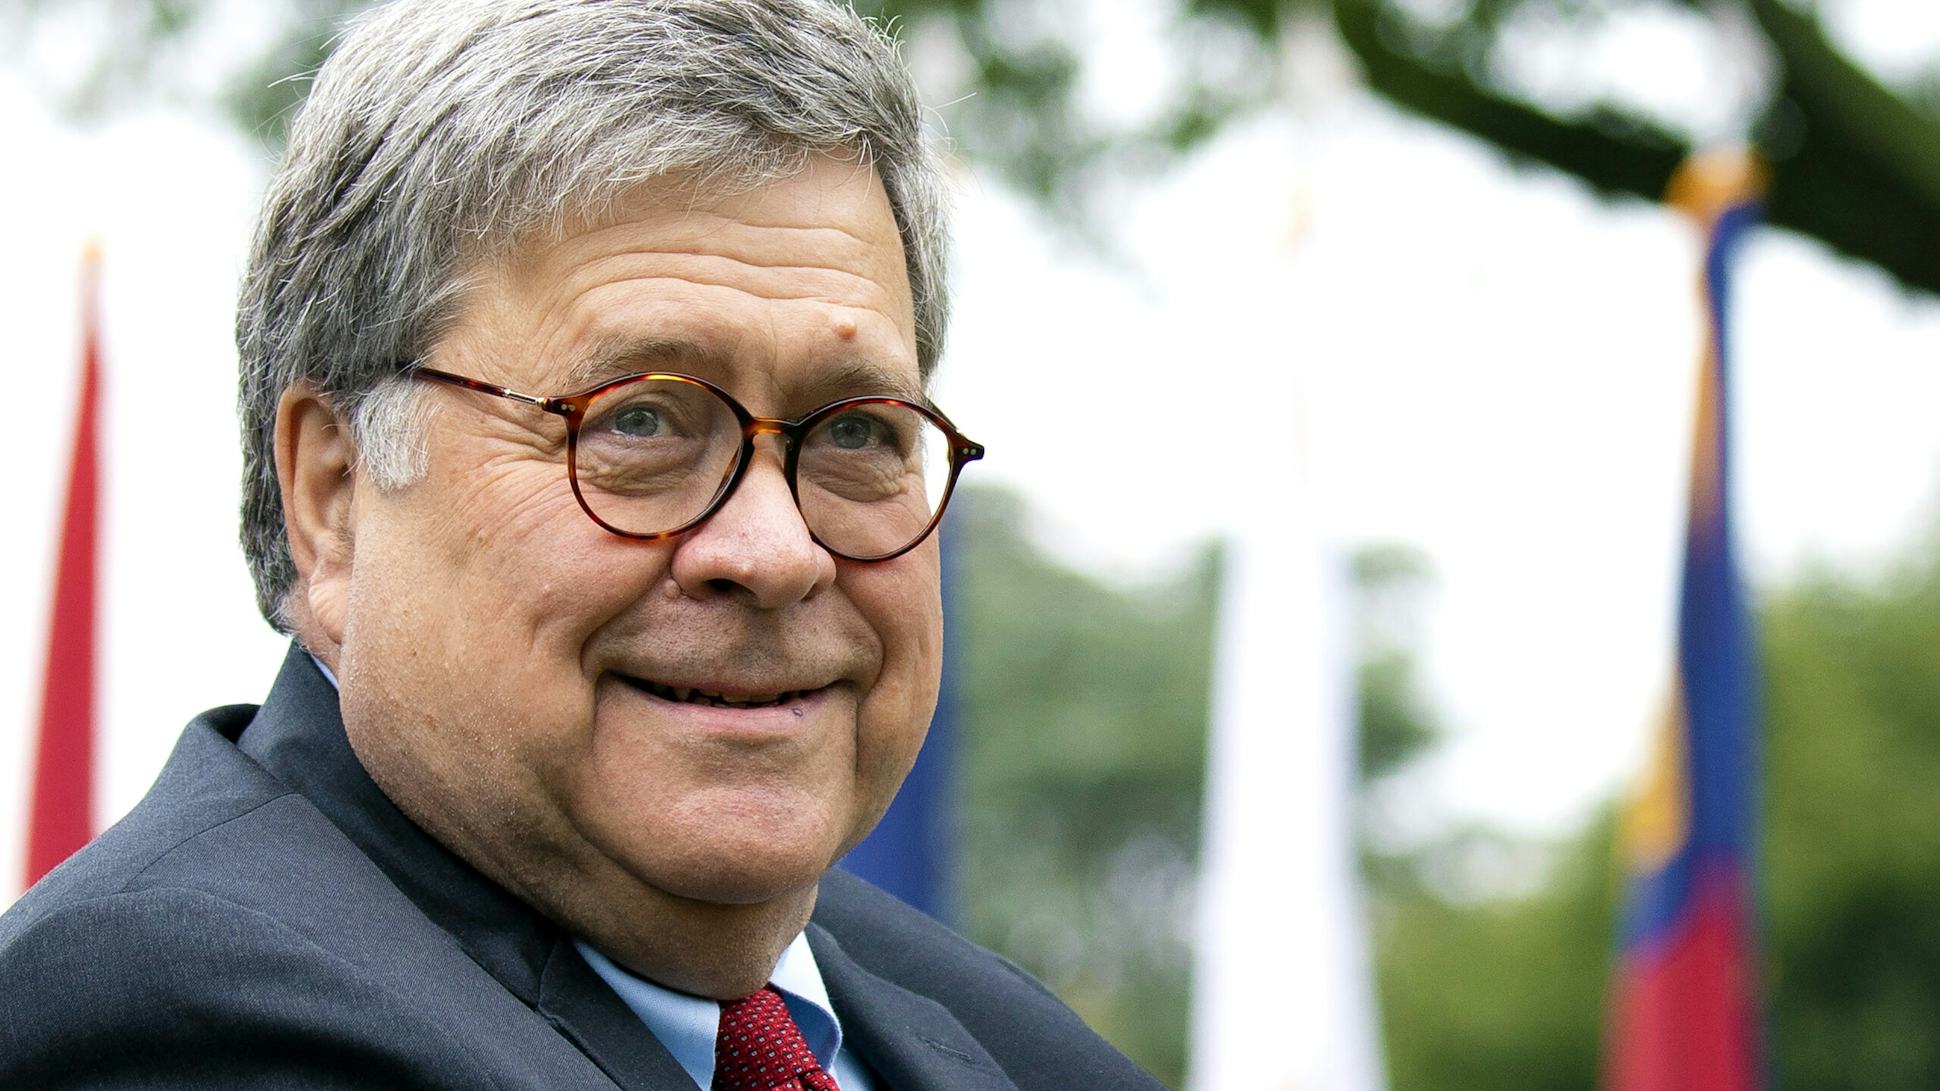 ‘It’s Just Bulls***’: AG William Barr Told Trump His Legal Team Was Lying To Him With Fraud Theories, Report Says